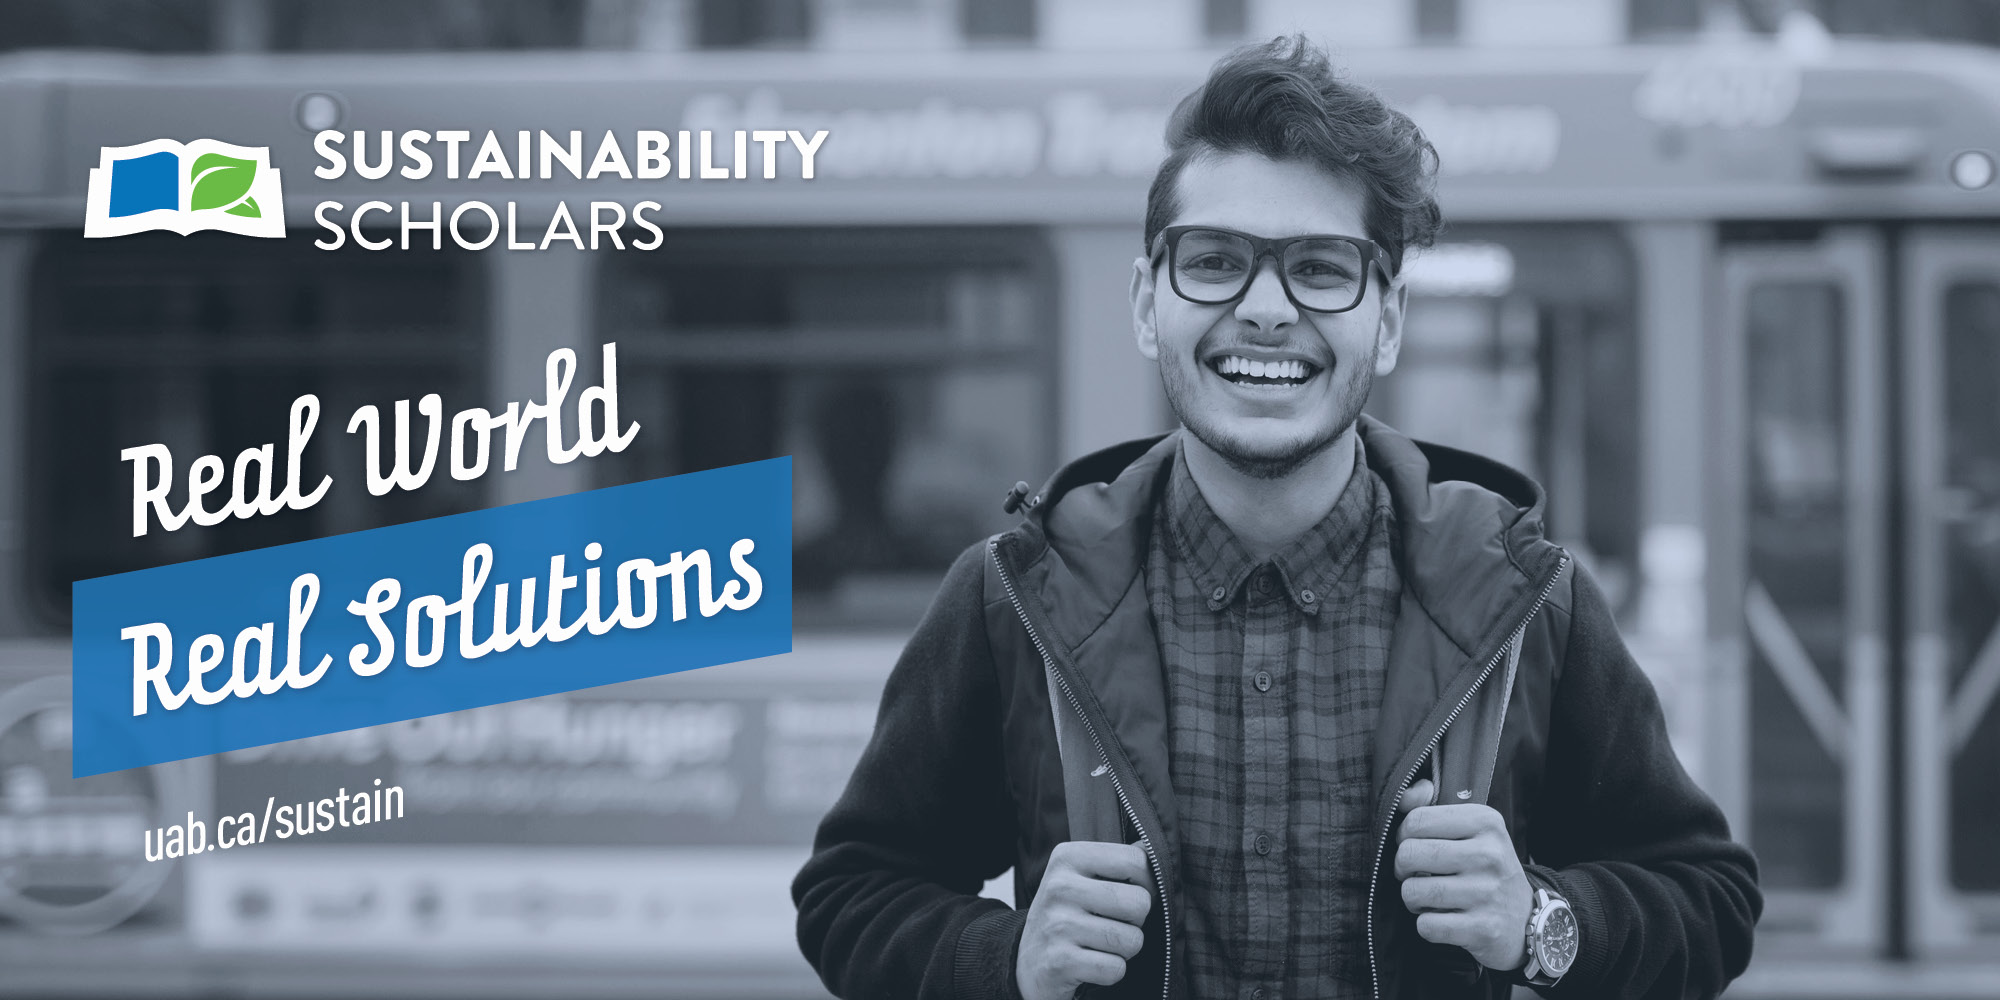 Sustainability Scholars. Real World, Real Solutions.